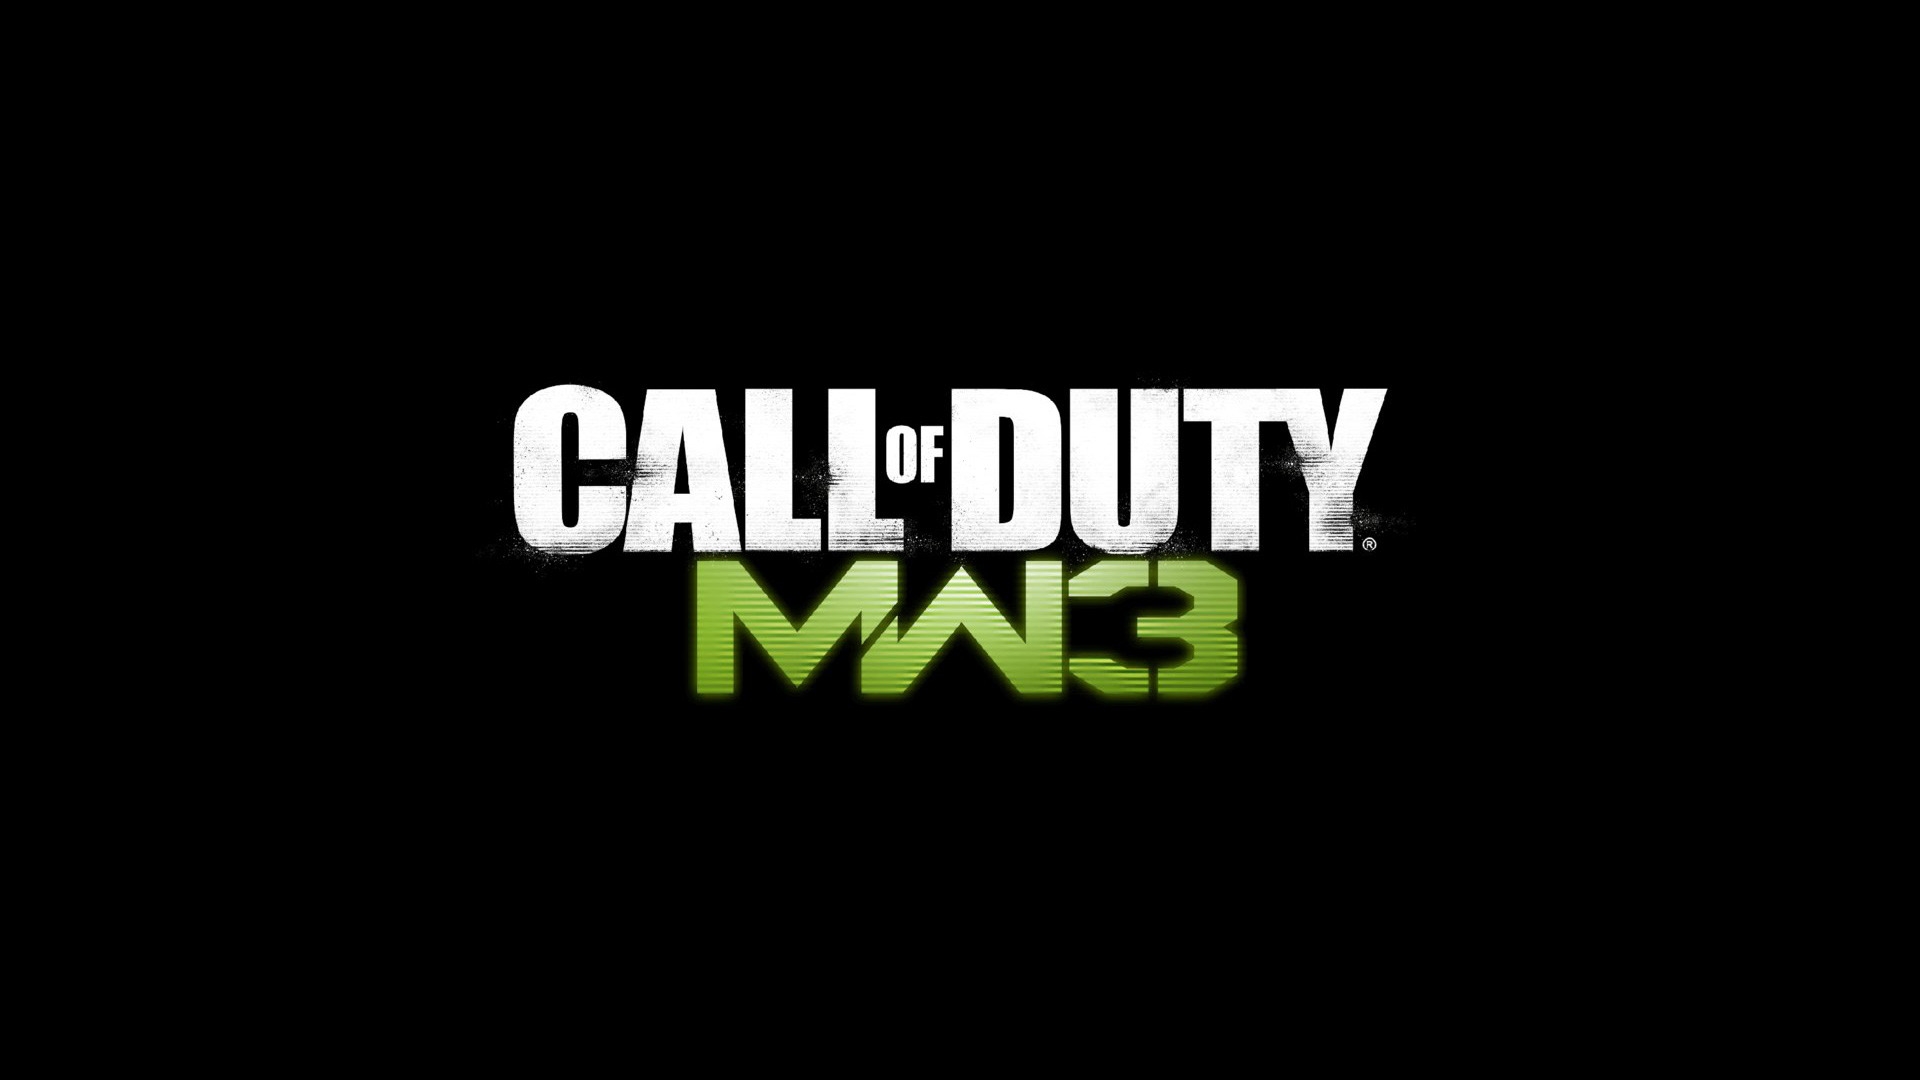 Call of Duty Modern Warfare 3 Game for 1920 x 1080 HDTV 1080p resolution